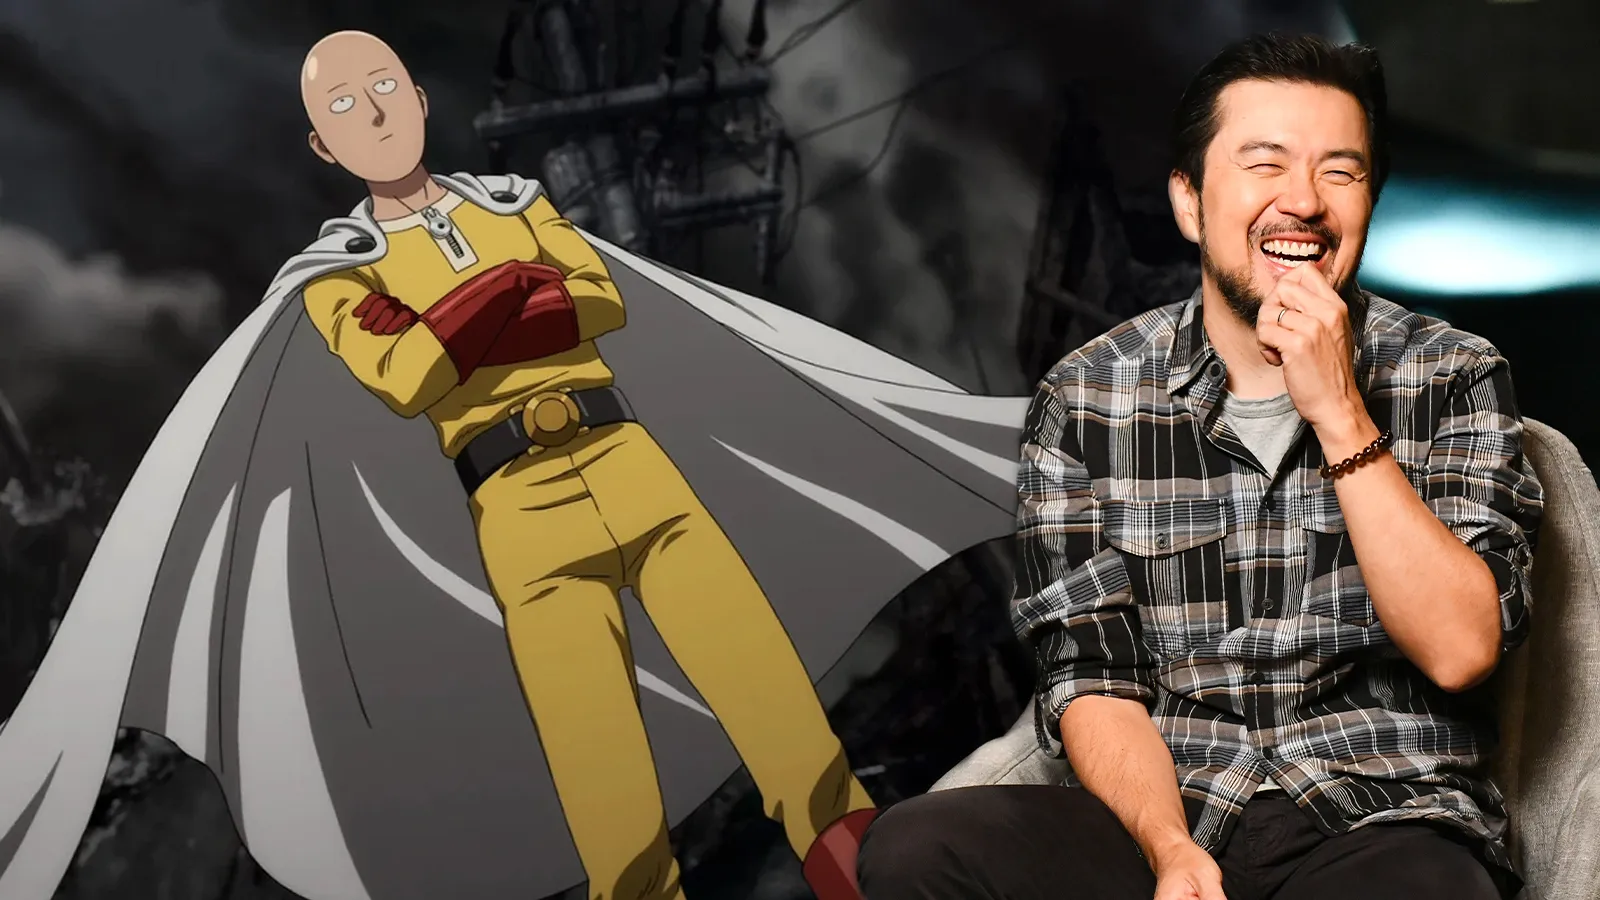 Justin Lin to direct 'One Punch Man' live-action film